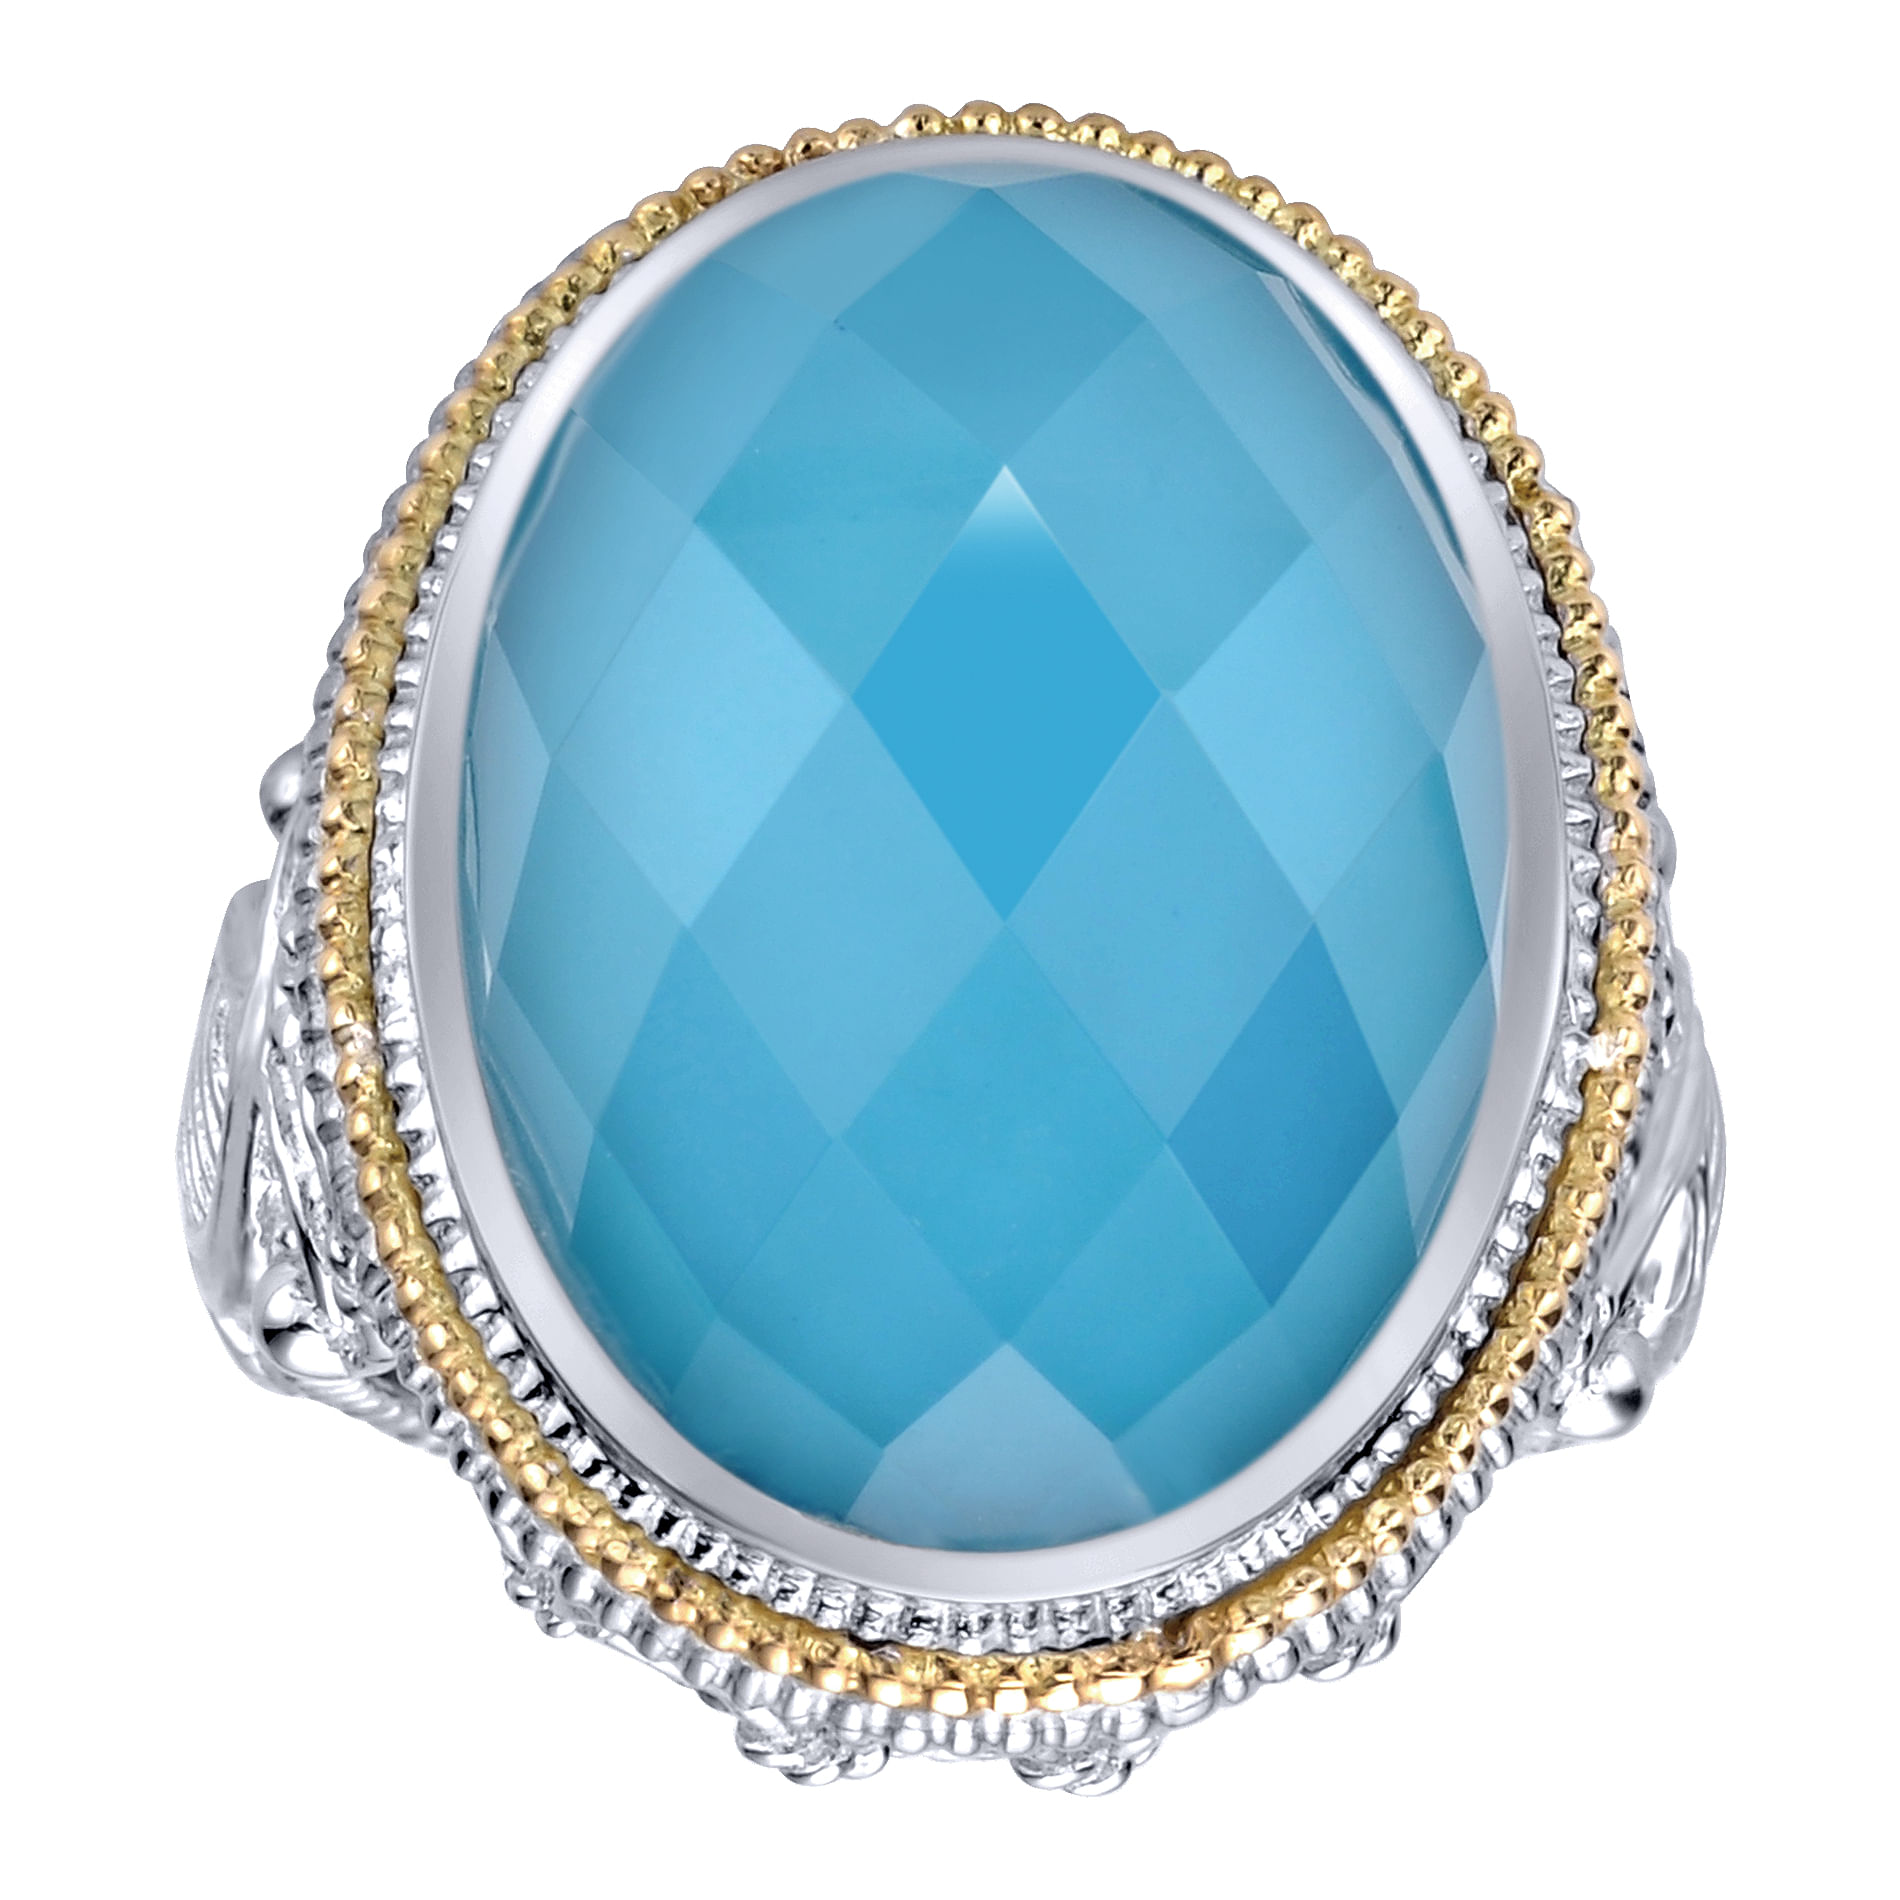 925 Sterling Silver and 18K Yellow Gold Oval Rock Crystal/Turquoise Ring